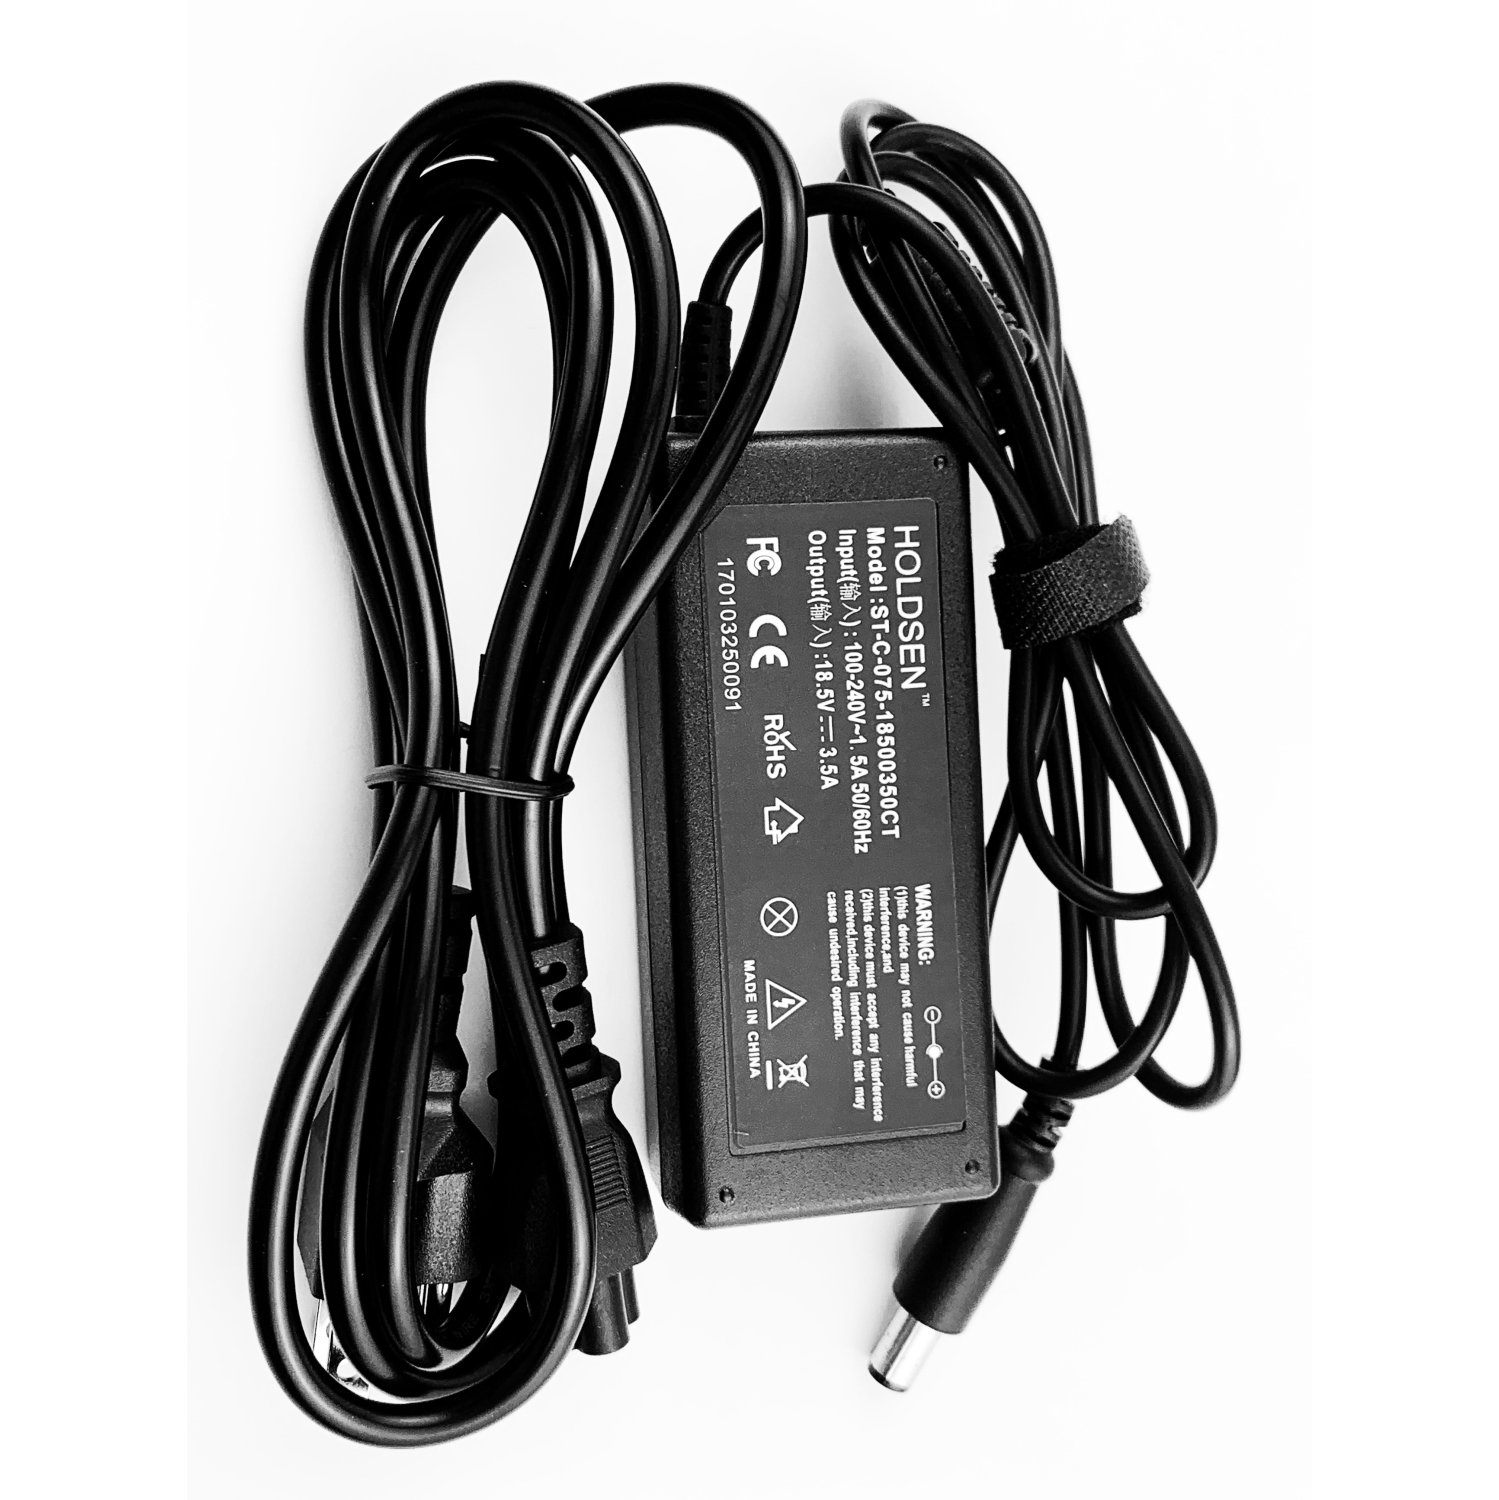 3.5A 65W AC adapter power charger for HP Pavilion G60630US G6-1017so G6-1170ev